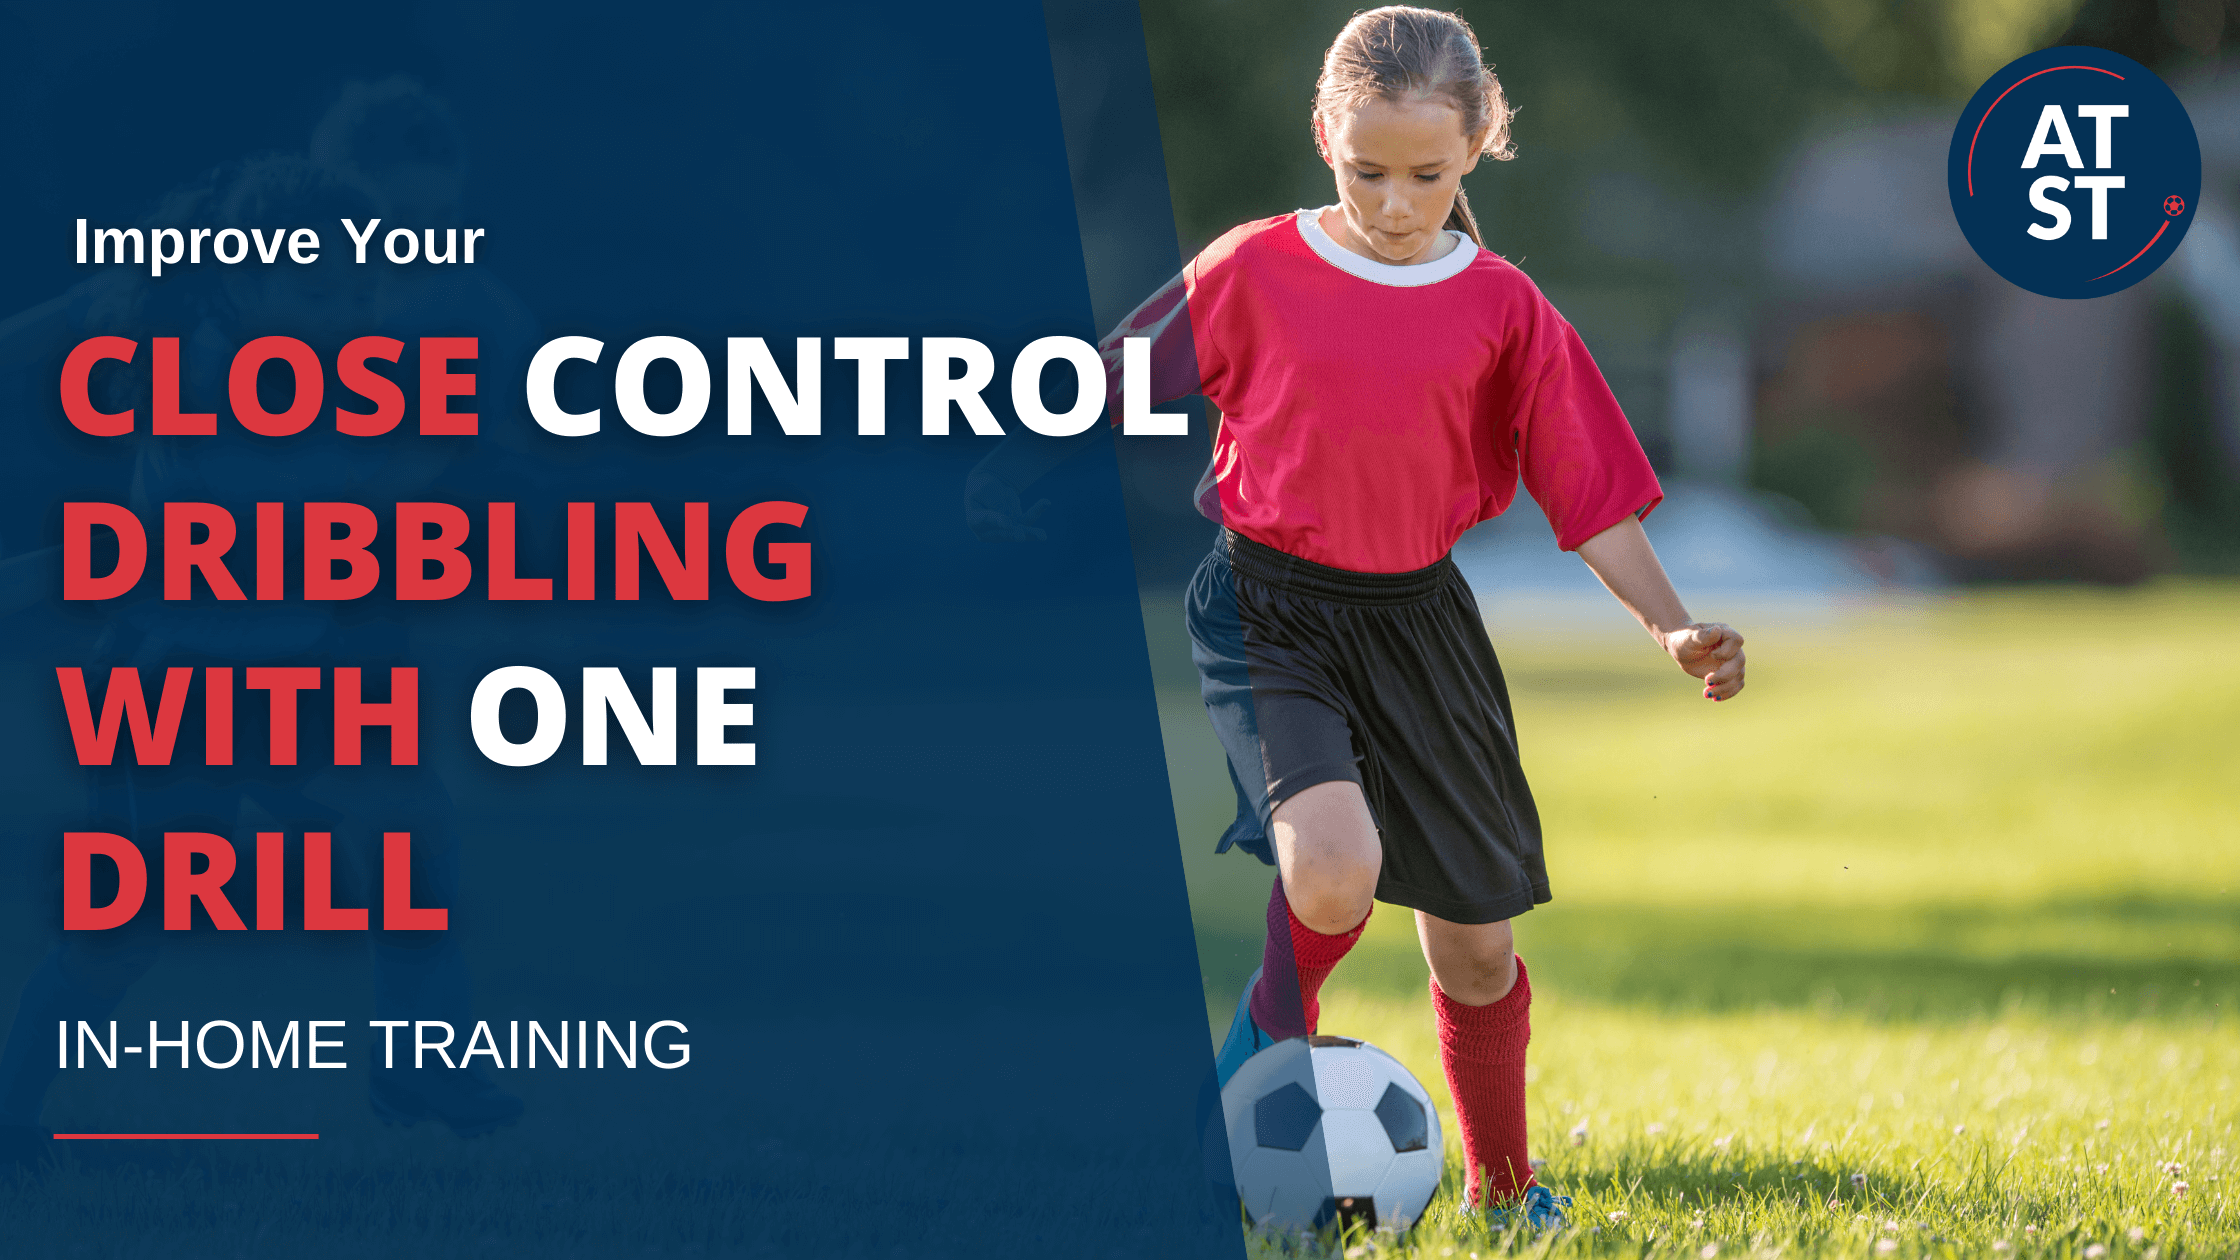 Improve Your Close Control Dribbling with One Drill